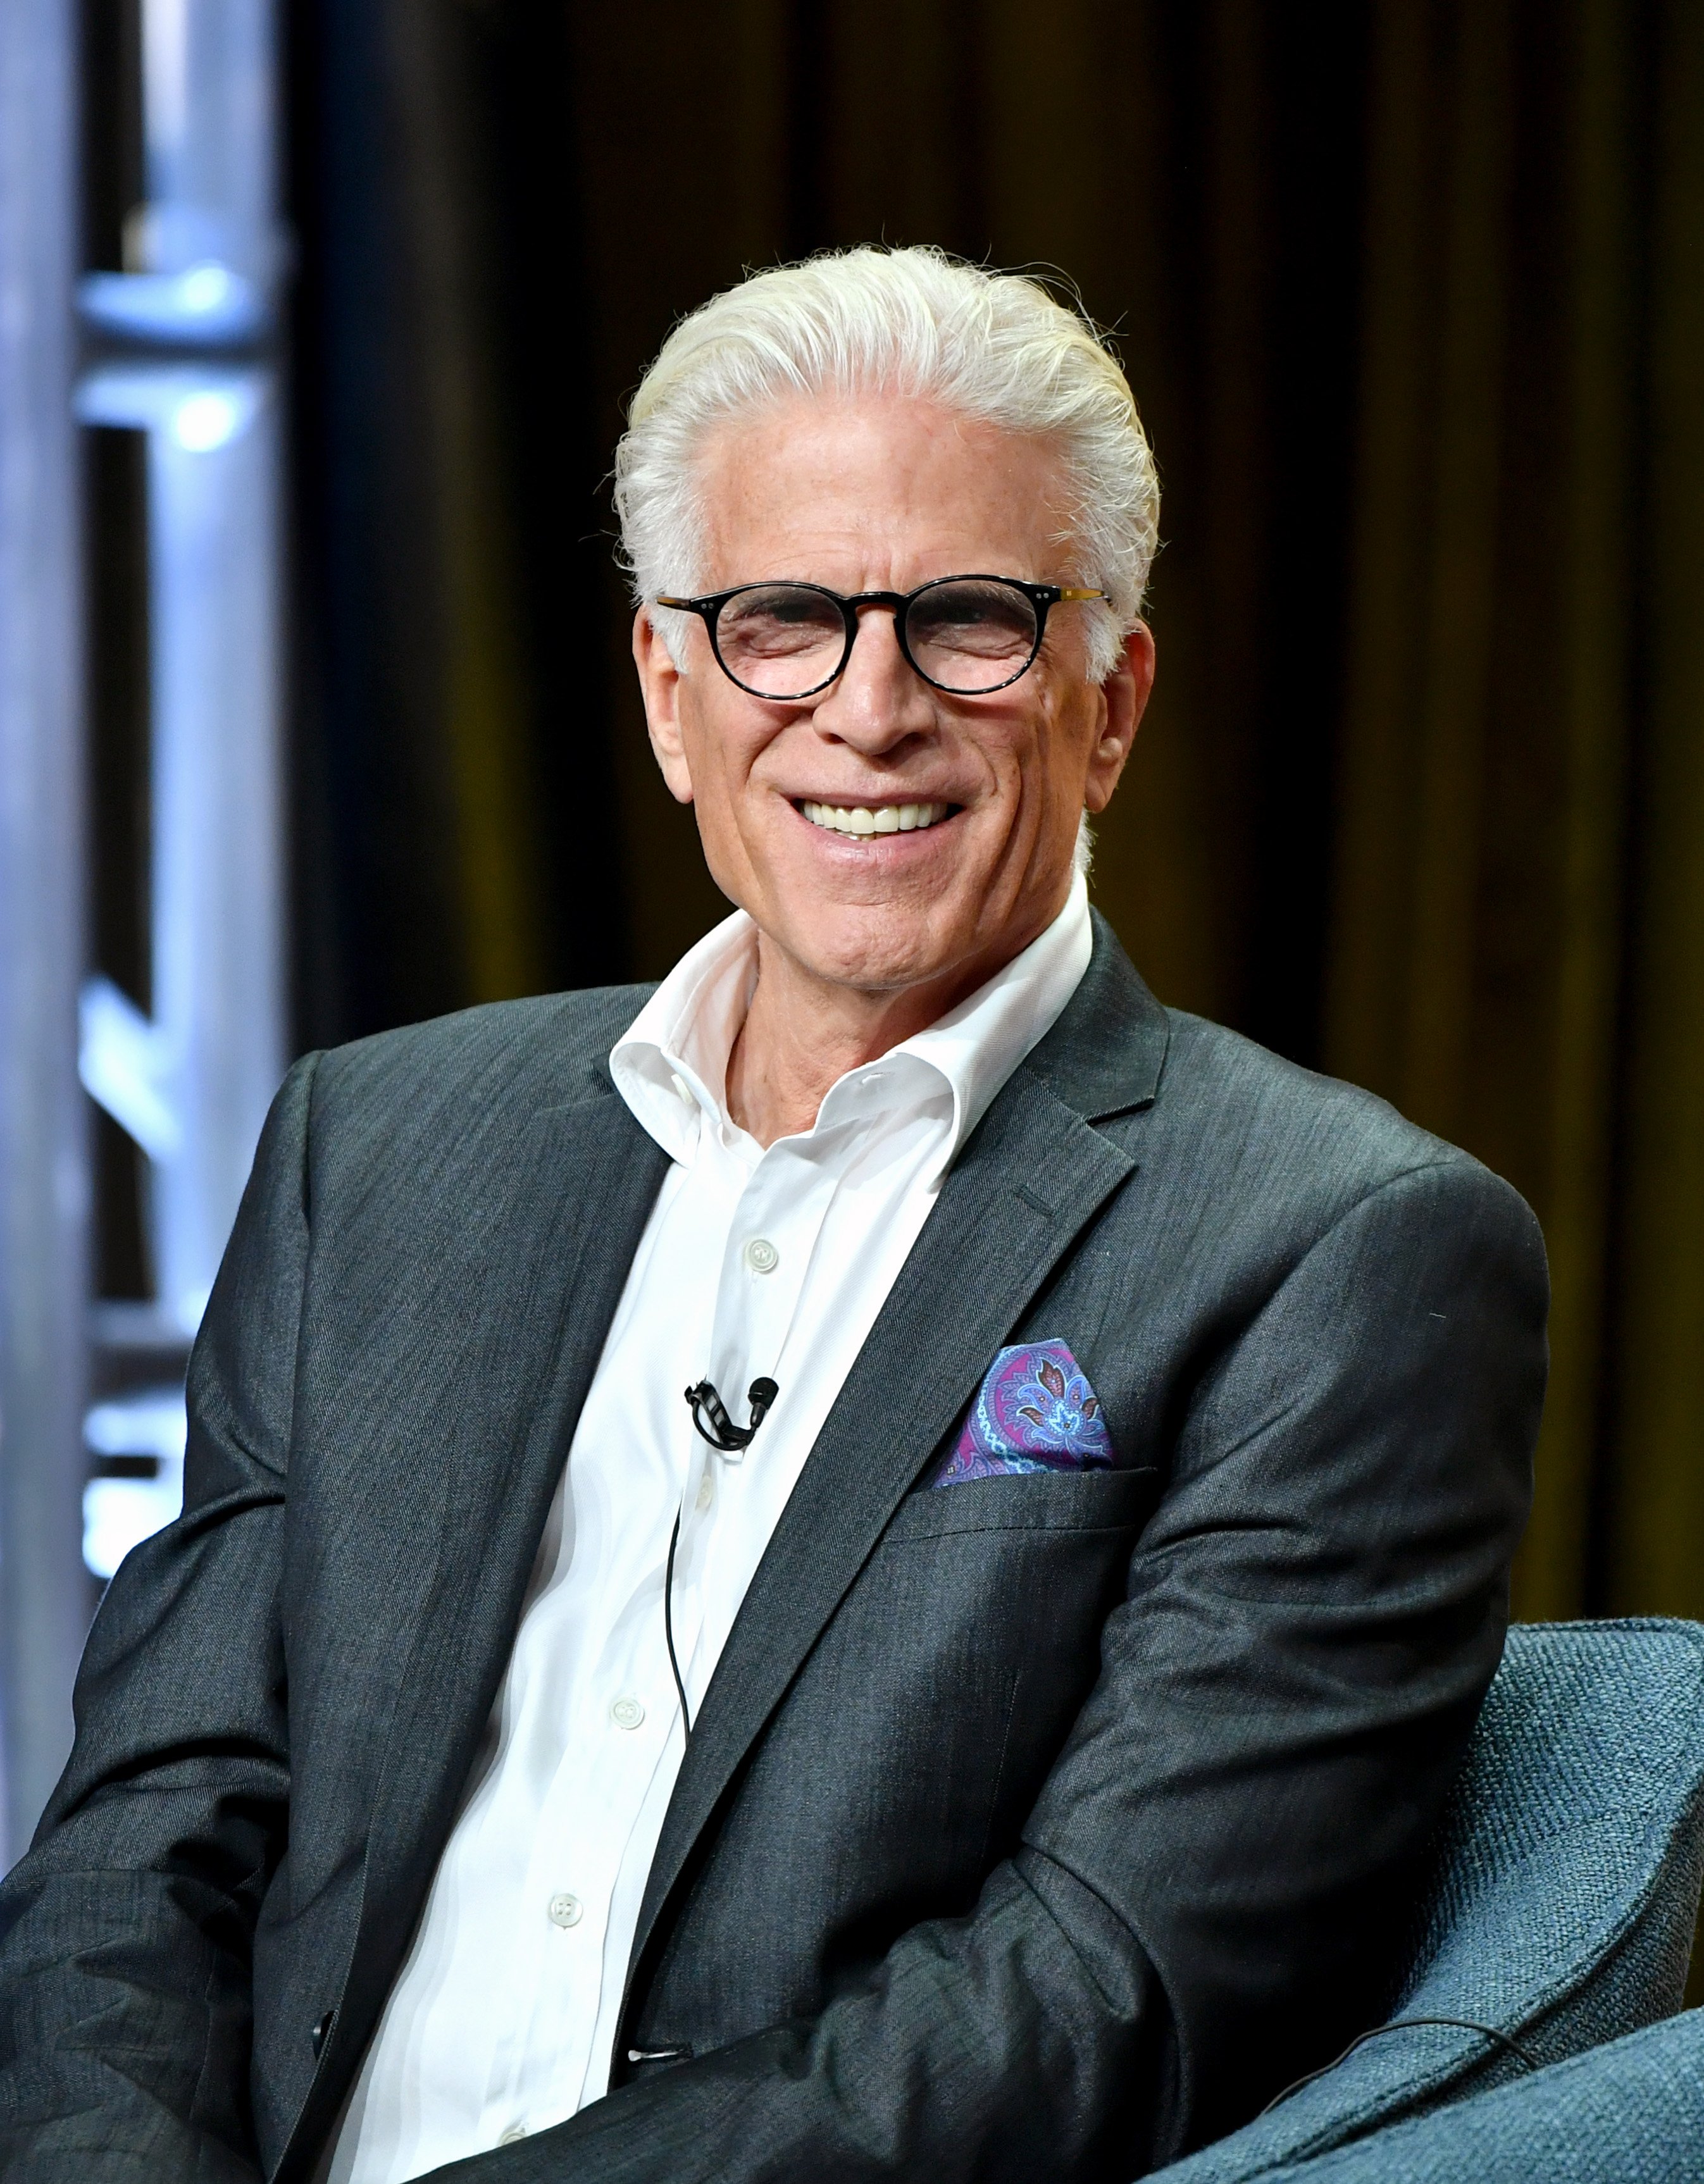 Ted Danson of 'The Good Place' speak during the NBC segment of the 2019 Summer TCA Press Tour at The Beverly Hilton Hotel on August 08, 2019 | Photo: Getty Images